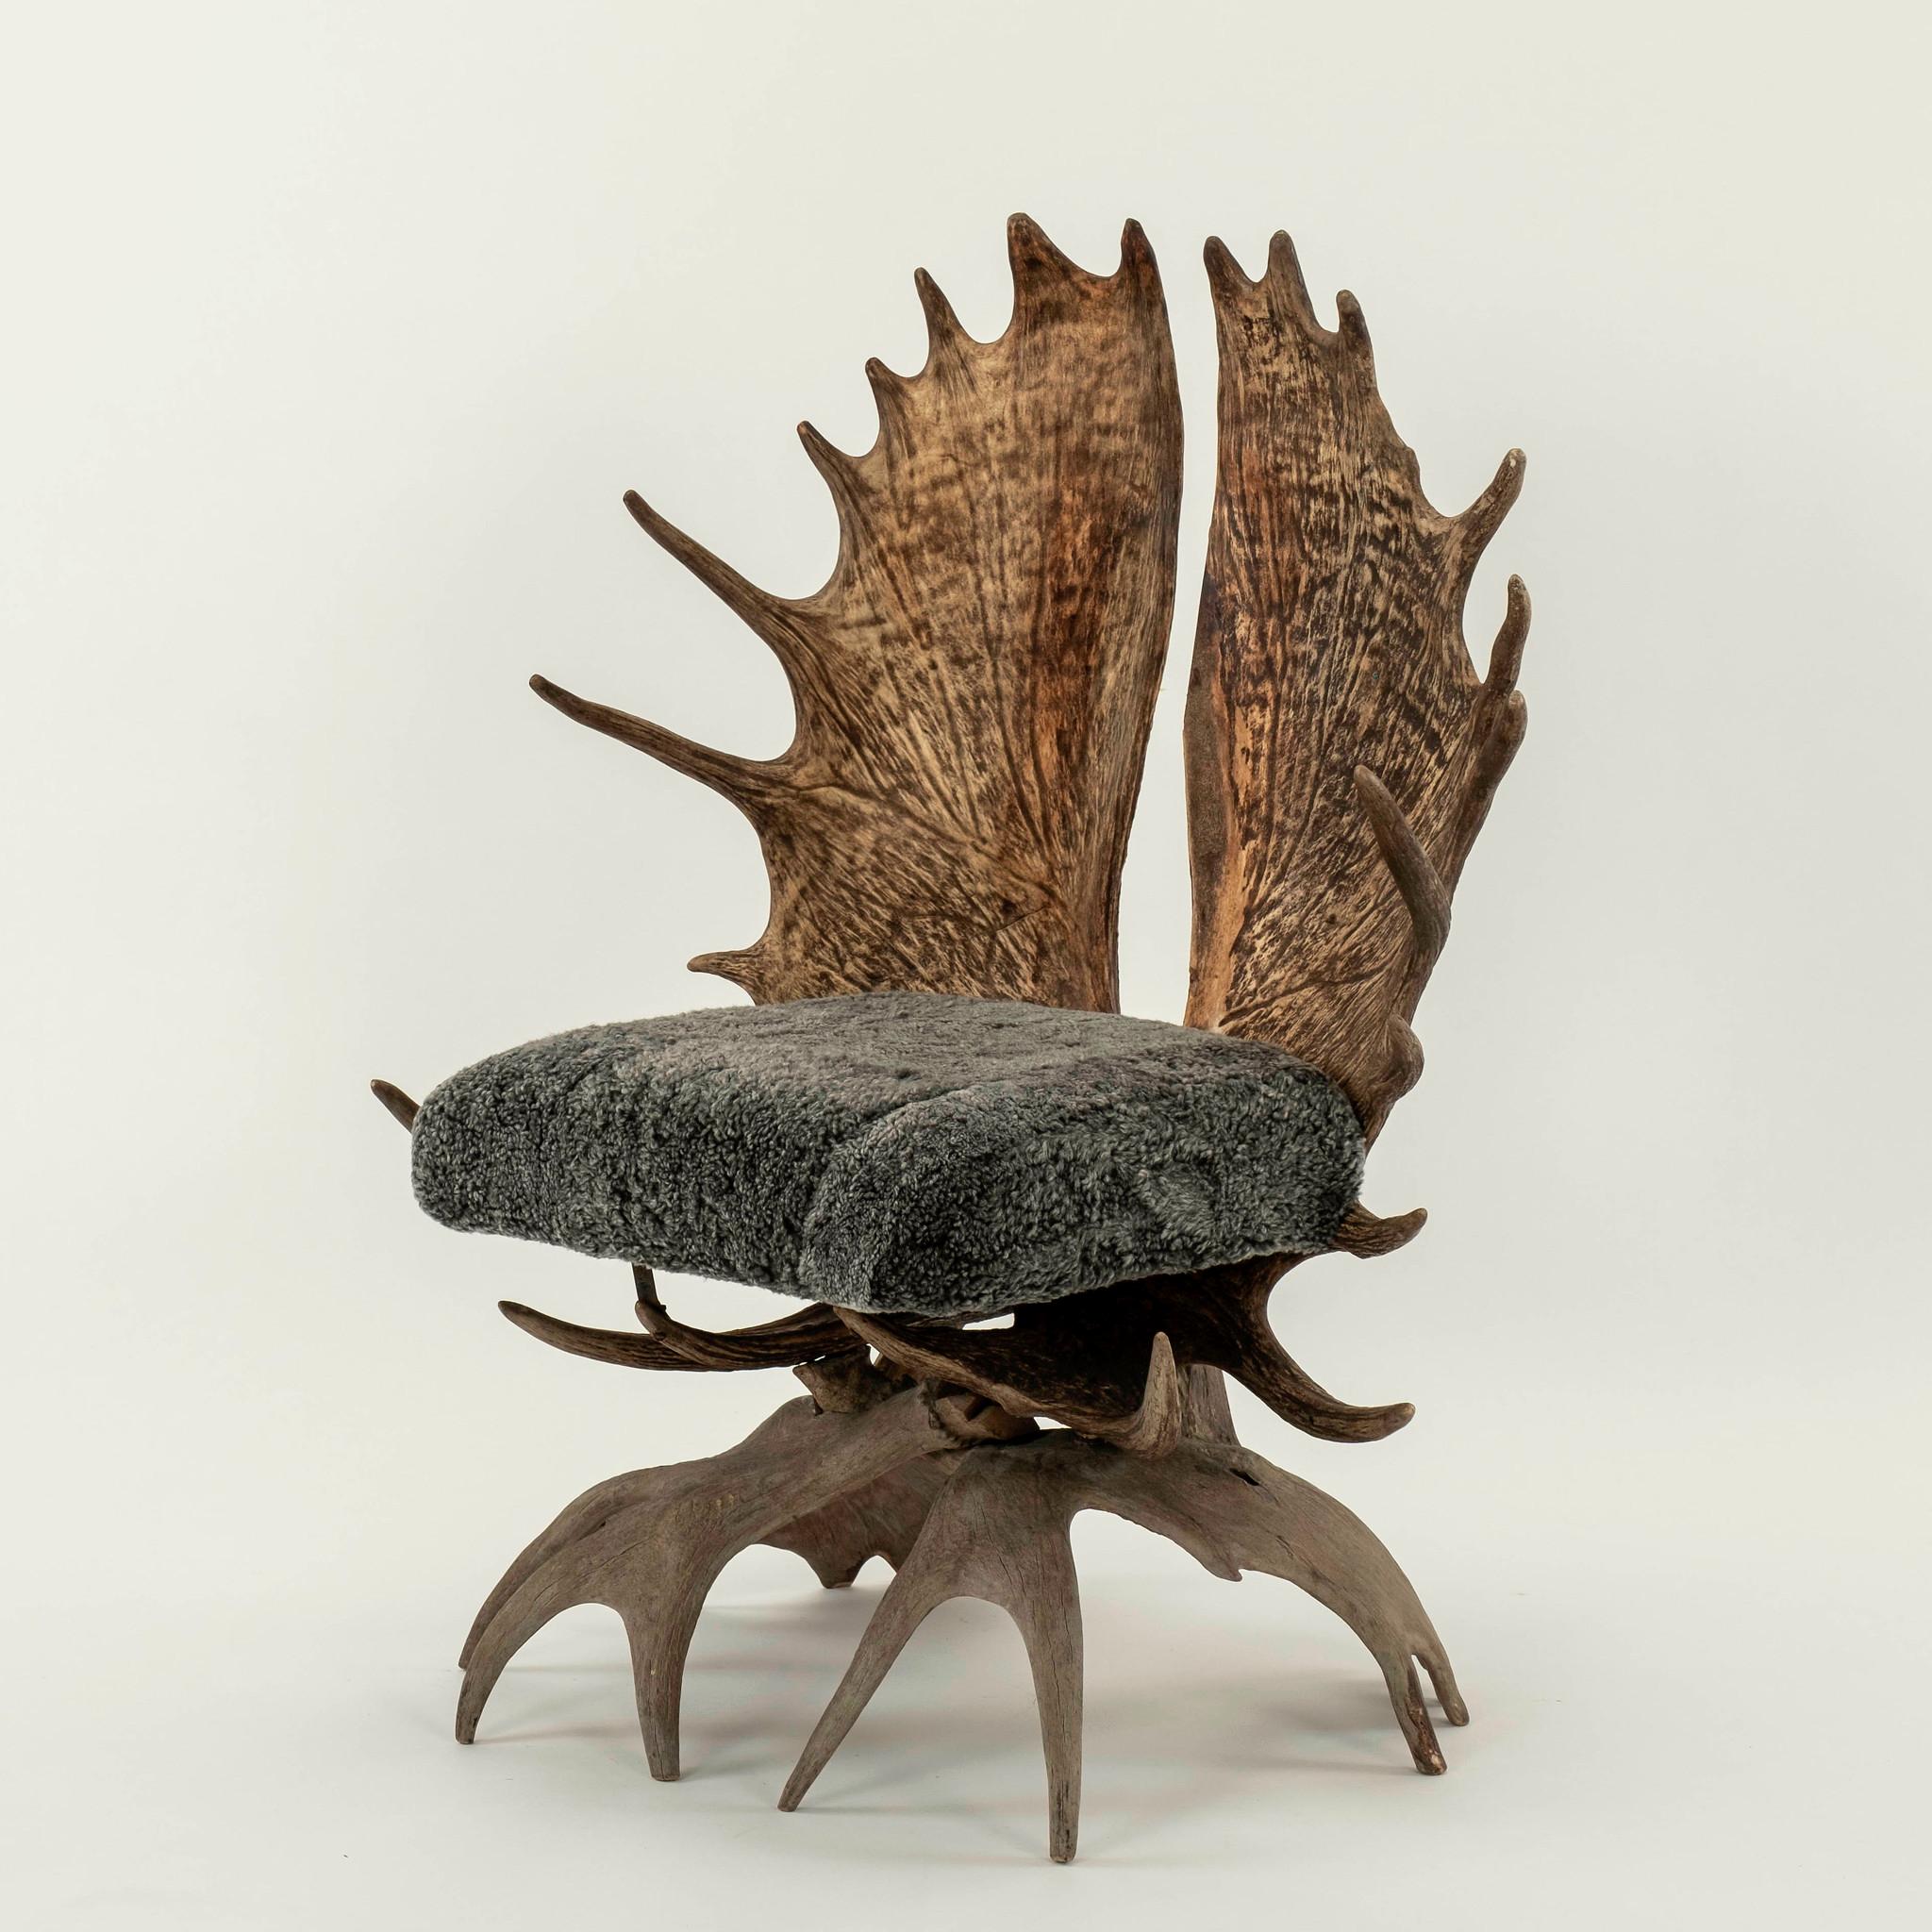 Early 20th Century handcrafted moose antler chair newly upholstered in a charcoal gray sheepskin.